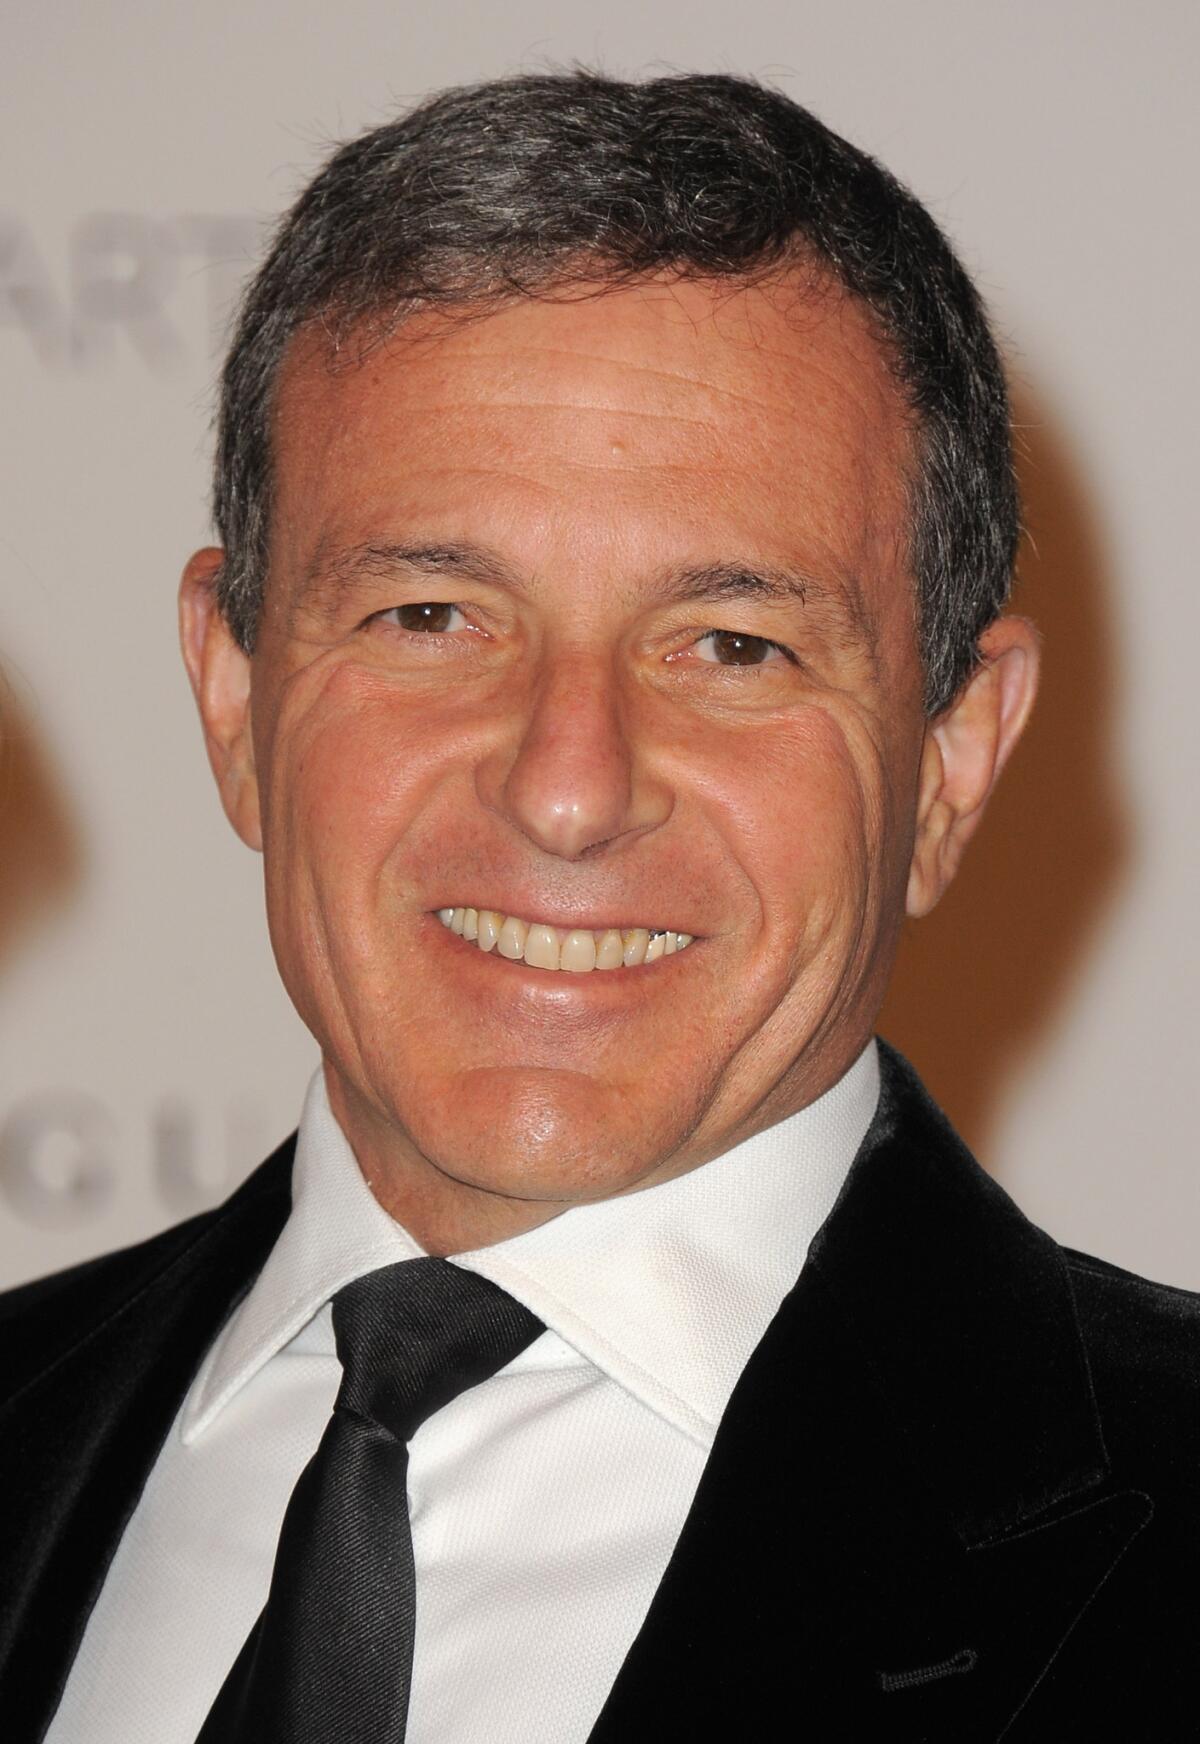 Walt Disney Co.'s Robert Iger will remain the company's chief executive through June 2016.